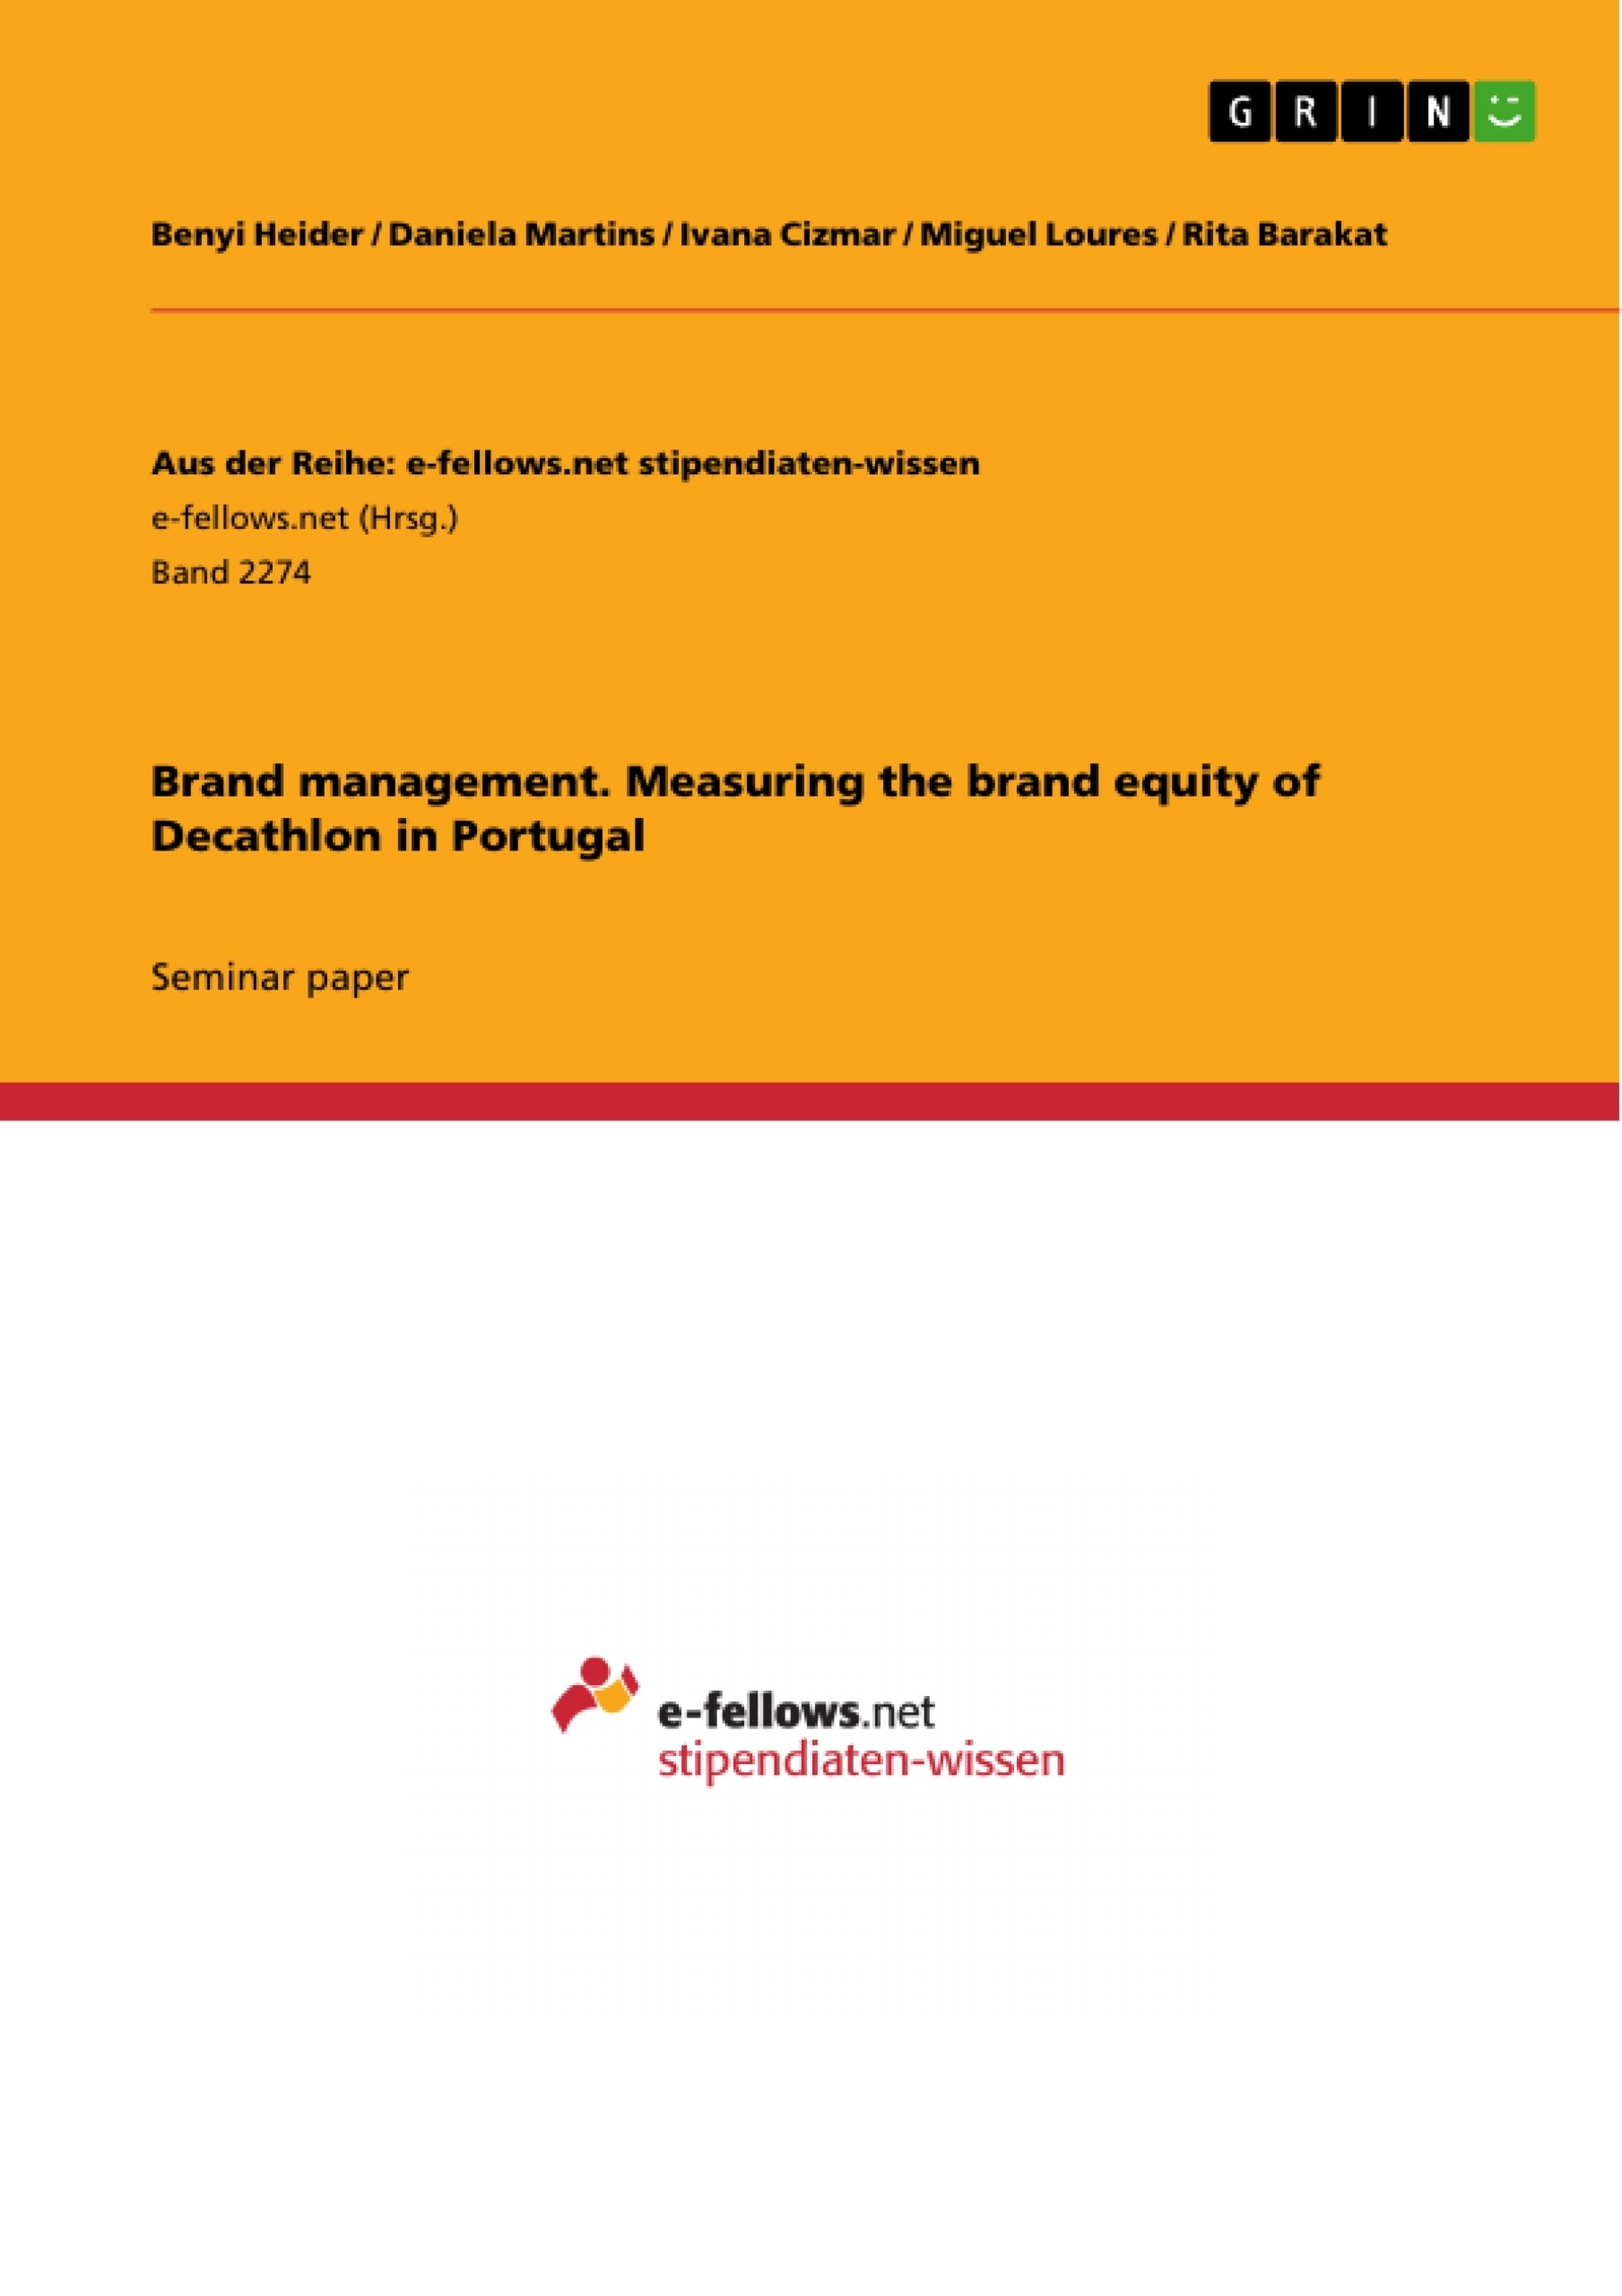 Title: Brand management. Measuring the brand equity of Decathlon in Portugal